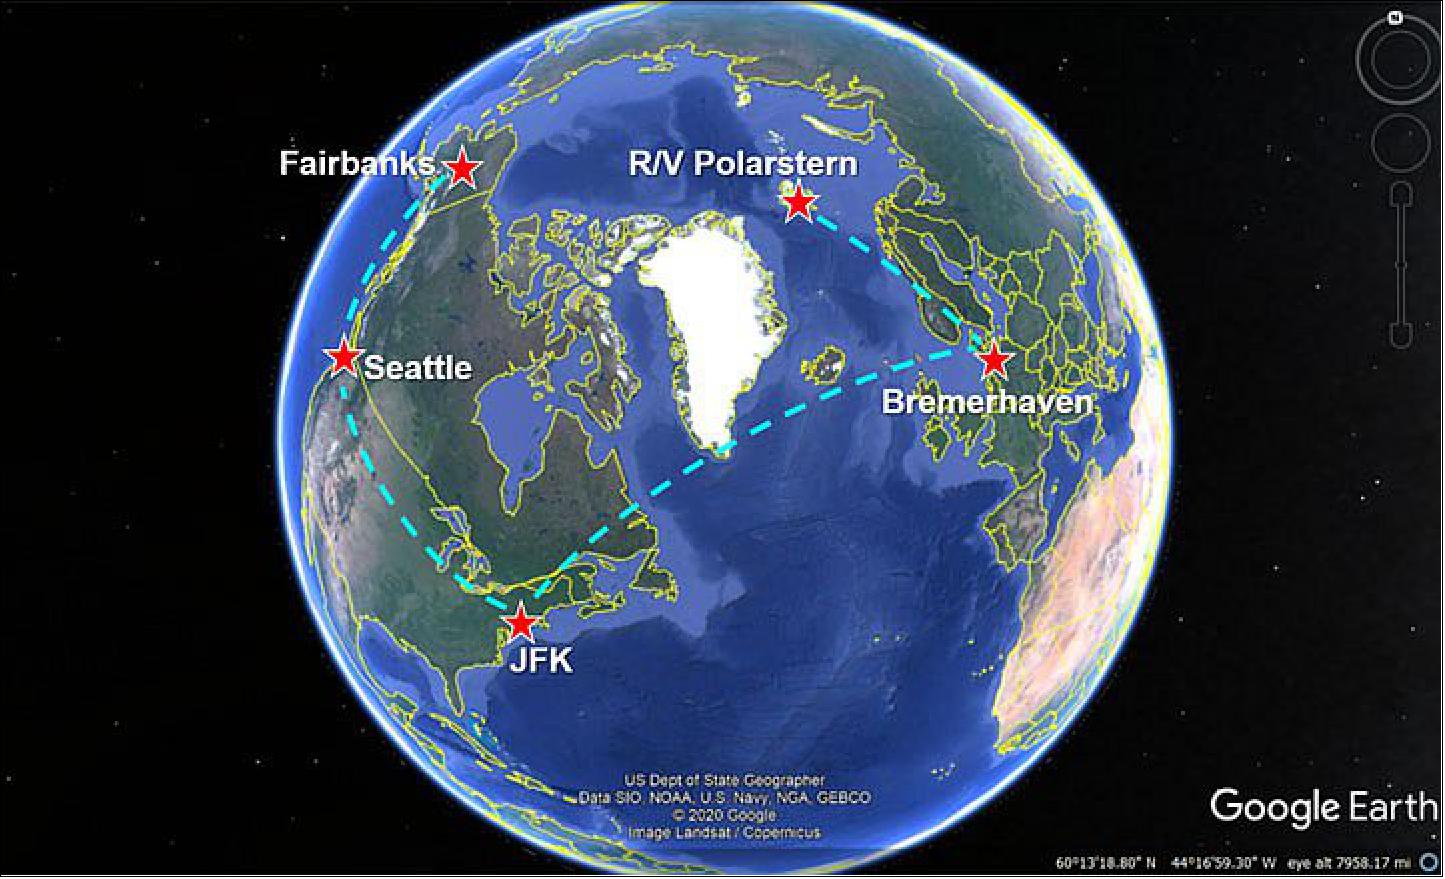 Figure 30: My travel itinerary: I got as far as Seattle in March. On April 29, I picked up my travel again and headed east to Bremerhaven. From Bremerhaven, we’ll travel to Svalbard via ships to meet the R/V Polarstern. It’s too bad there aren’t direct flights between Fairbanks and the Polarstern (image credit: Melinda Webster)